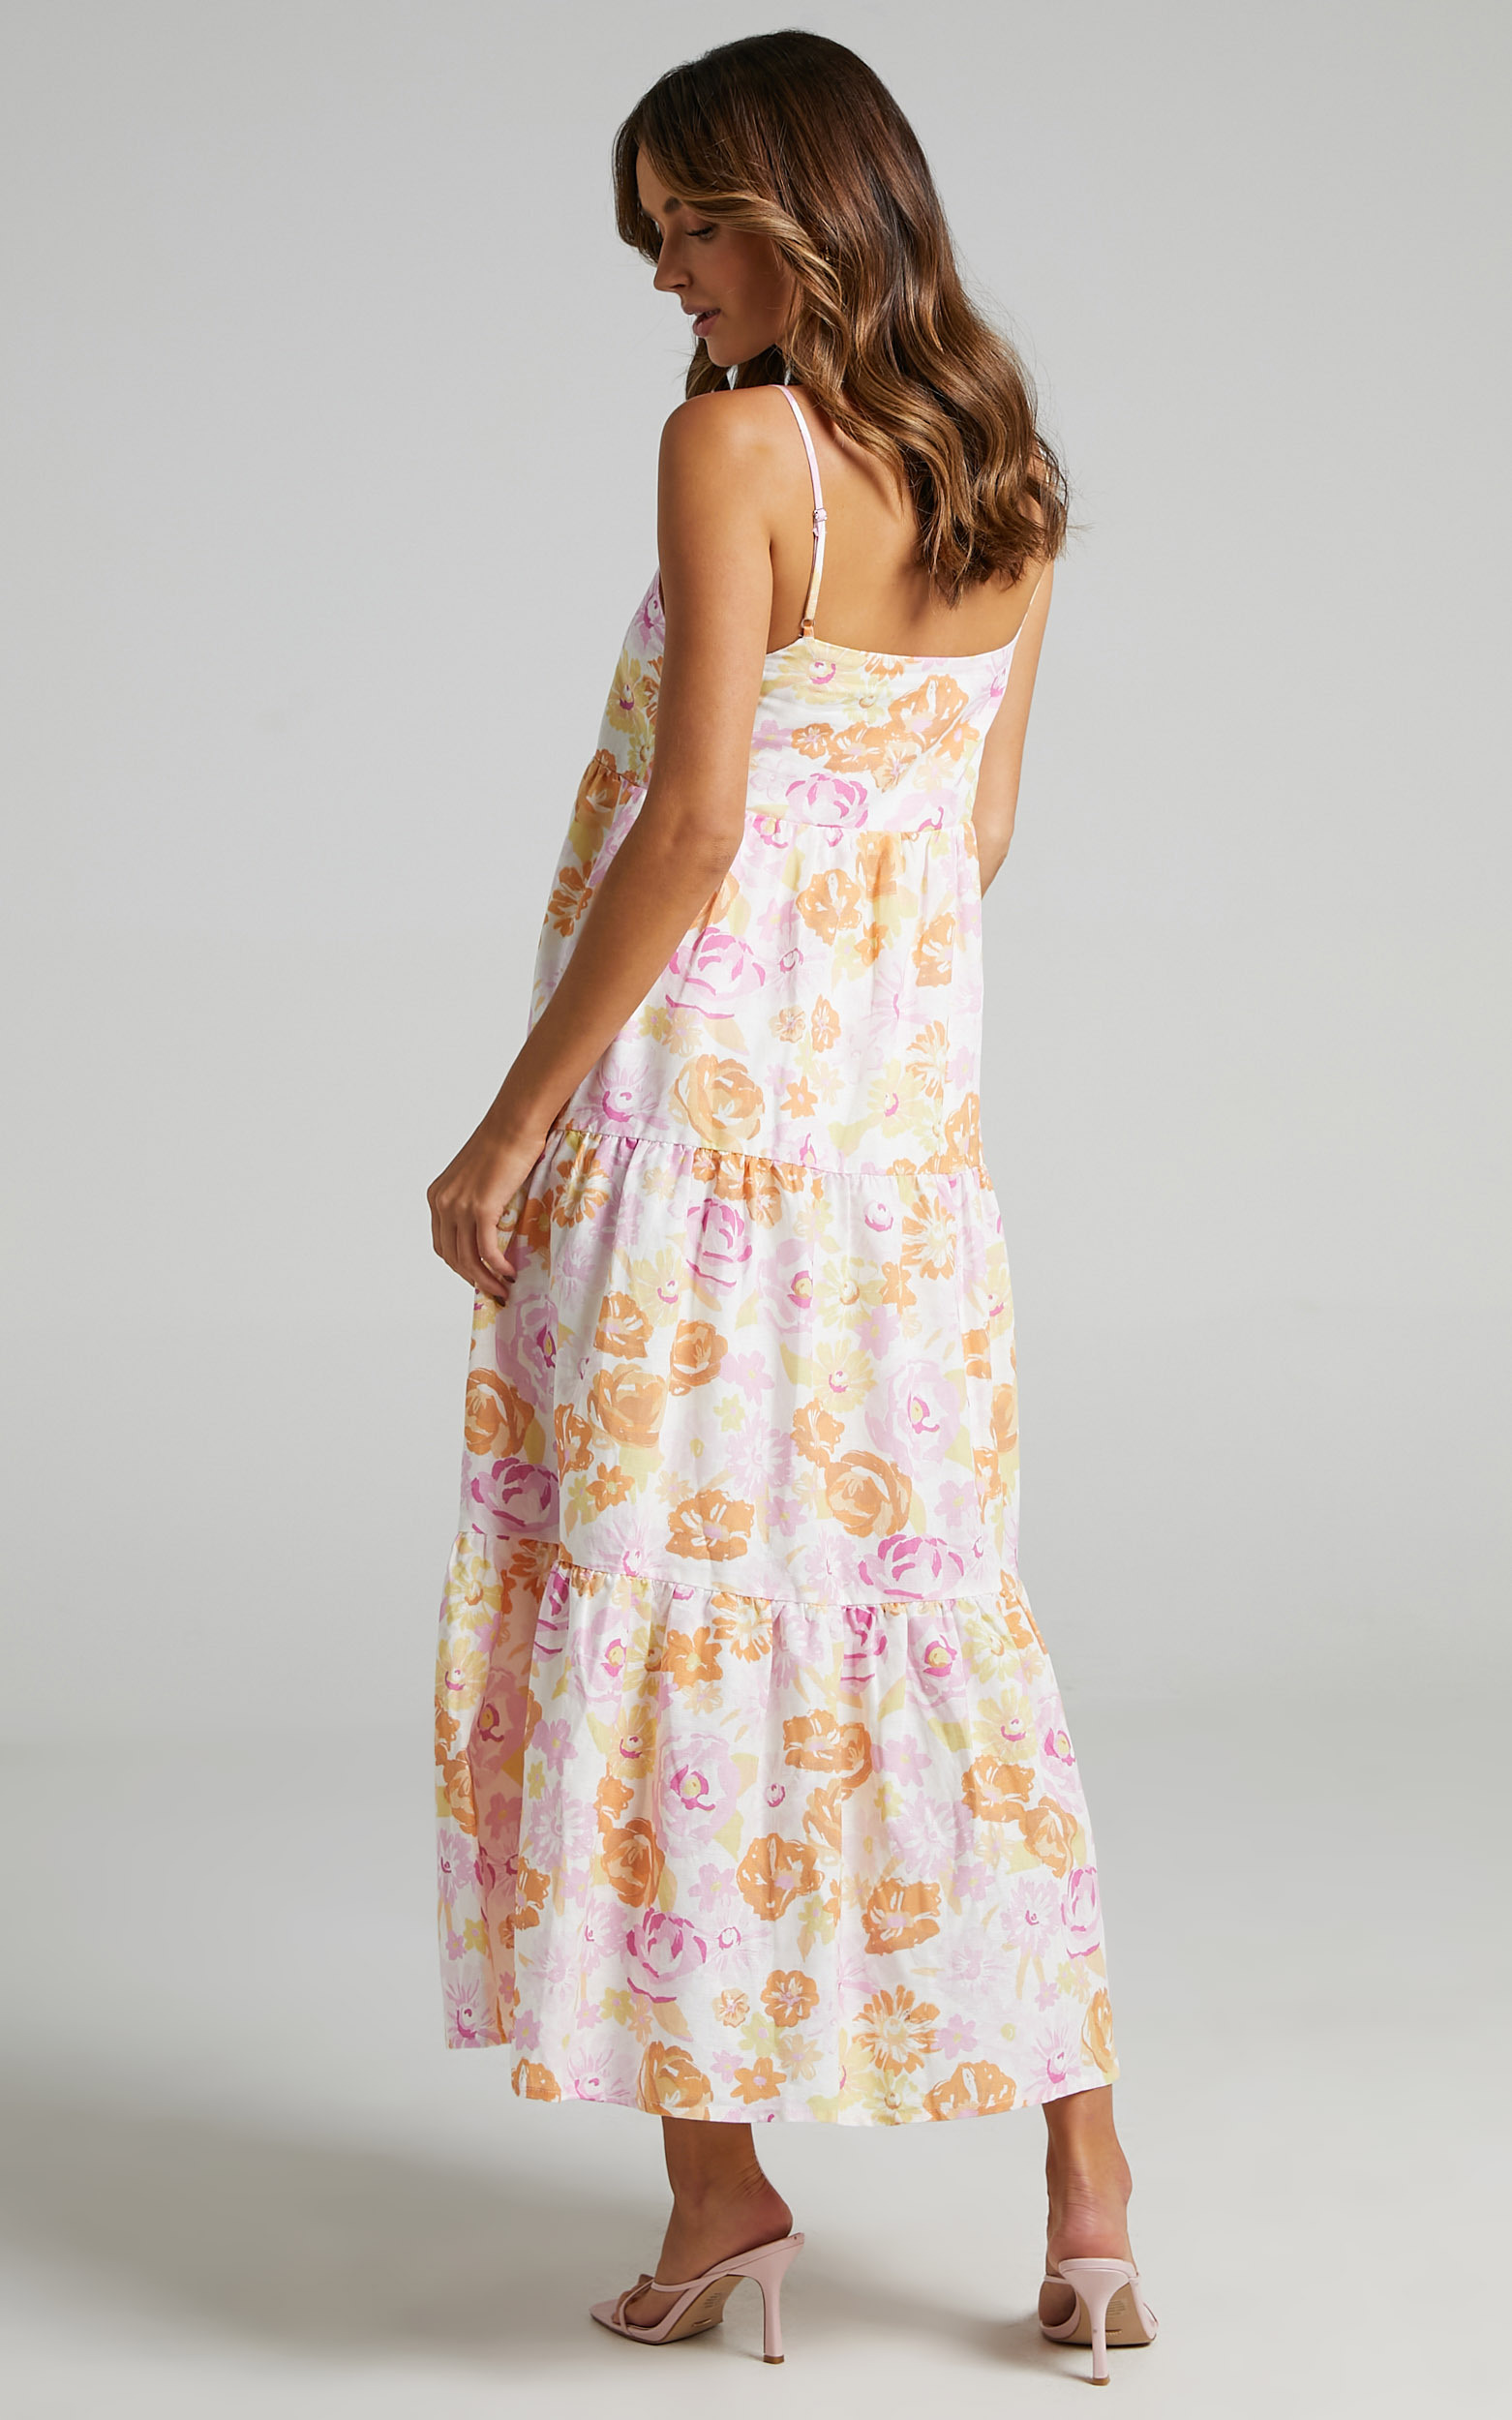 Charlie Holiday - Isabella Maxi Dress in Summertime Floral | Showpo